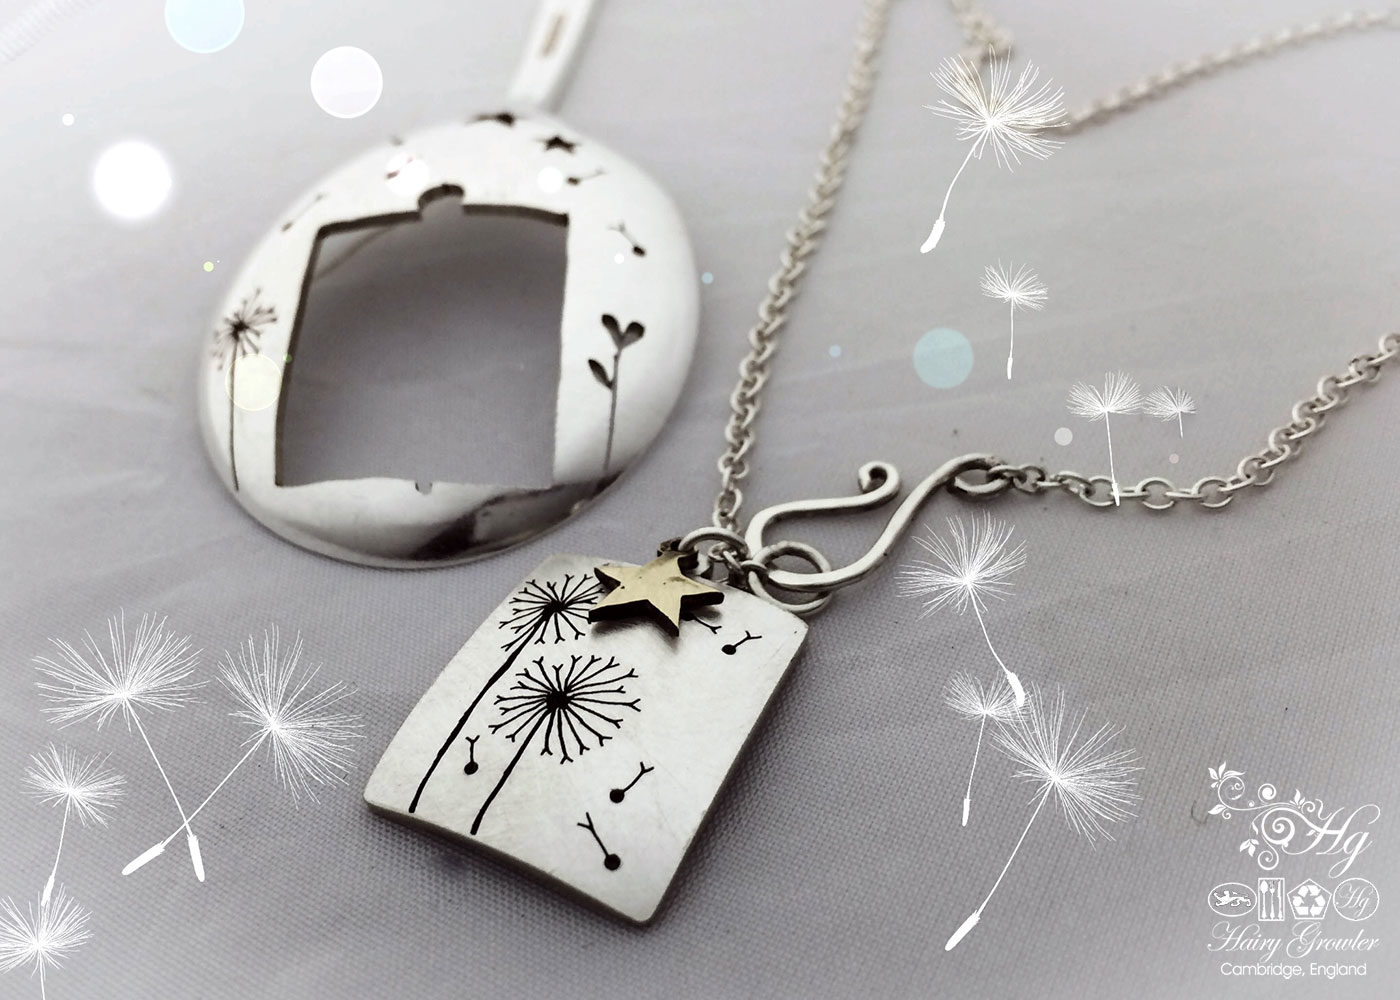 Dandelion clock jewellery Handmade and upcycled dandelion clock necklace reverse of spoon